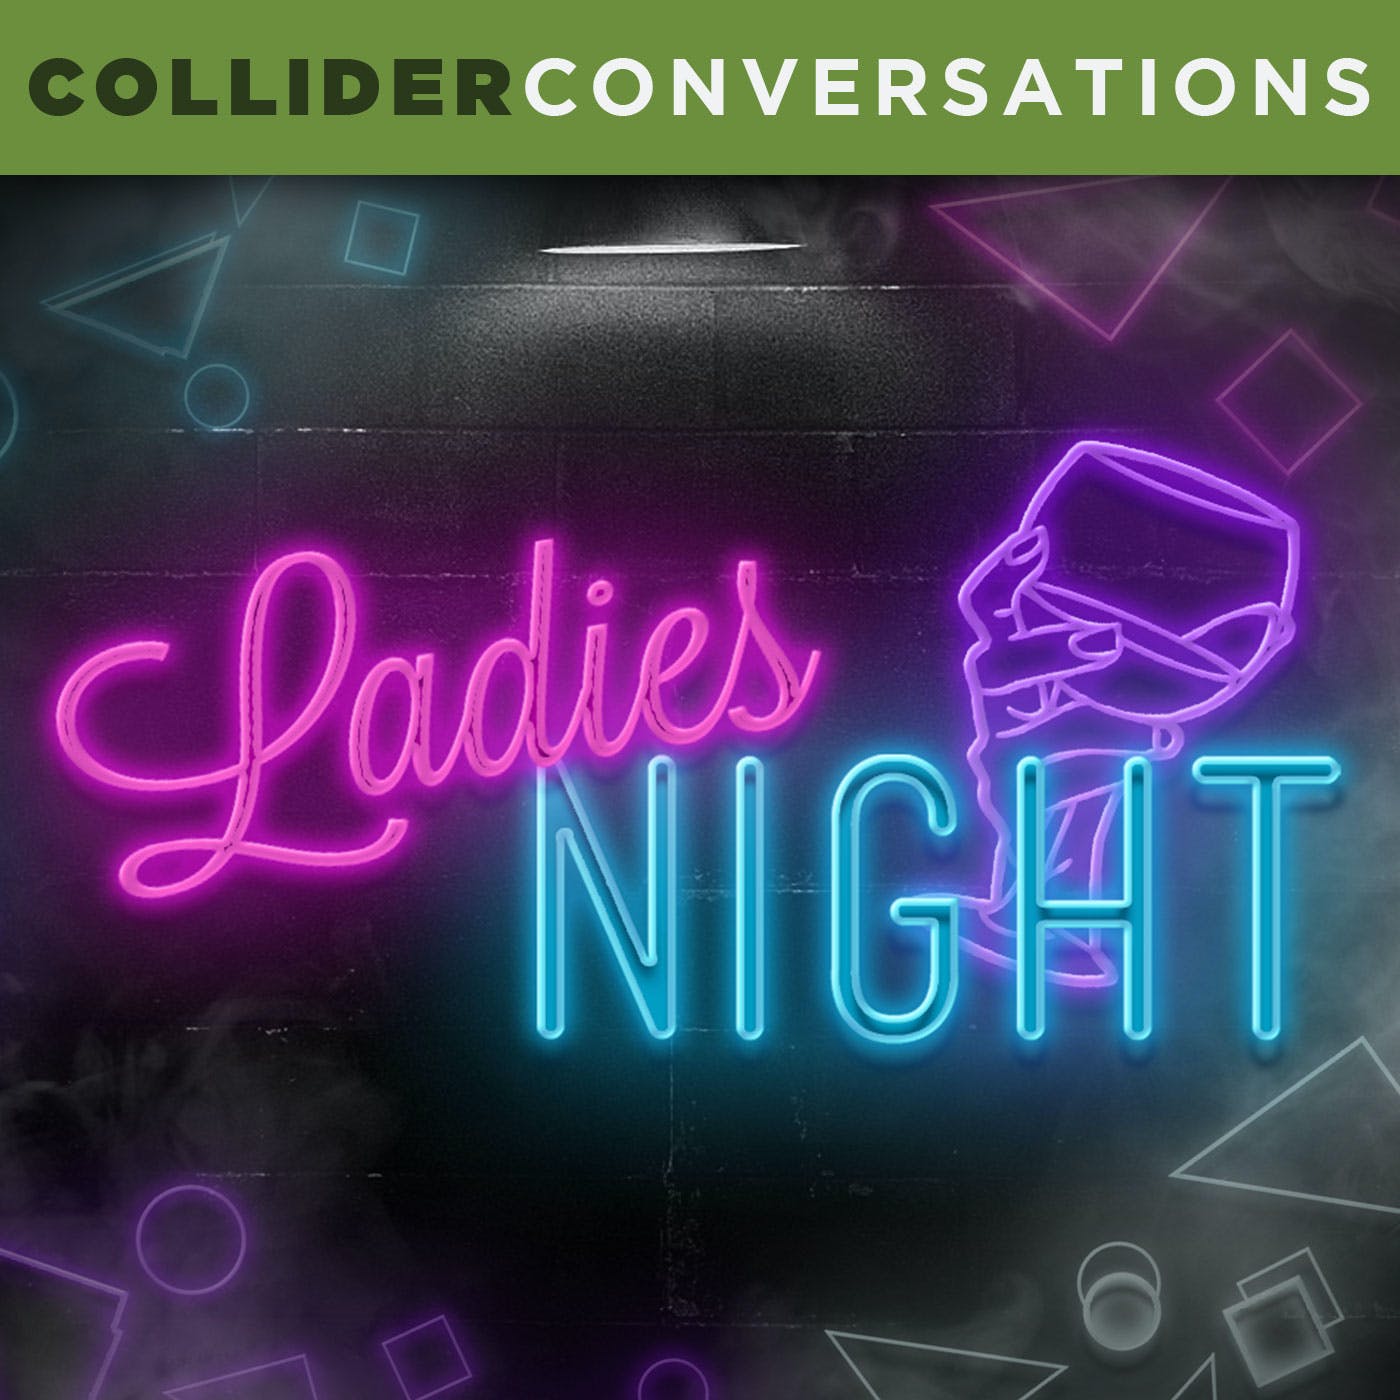 Collider Ladies Night - Lauren Lapkus on Making It In Comedy, Jurassic World & The Wrong Missy